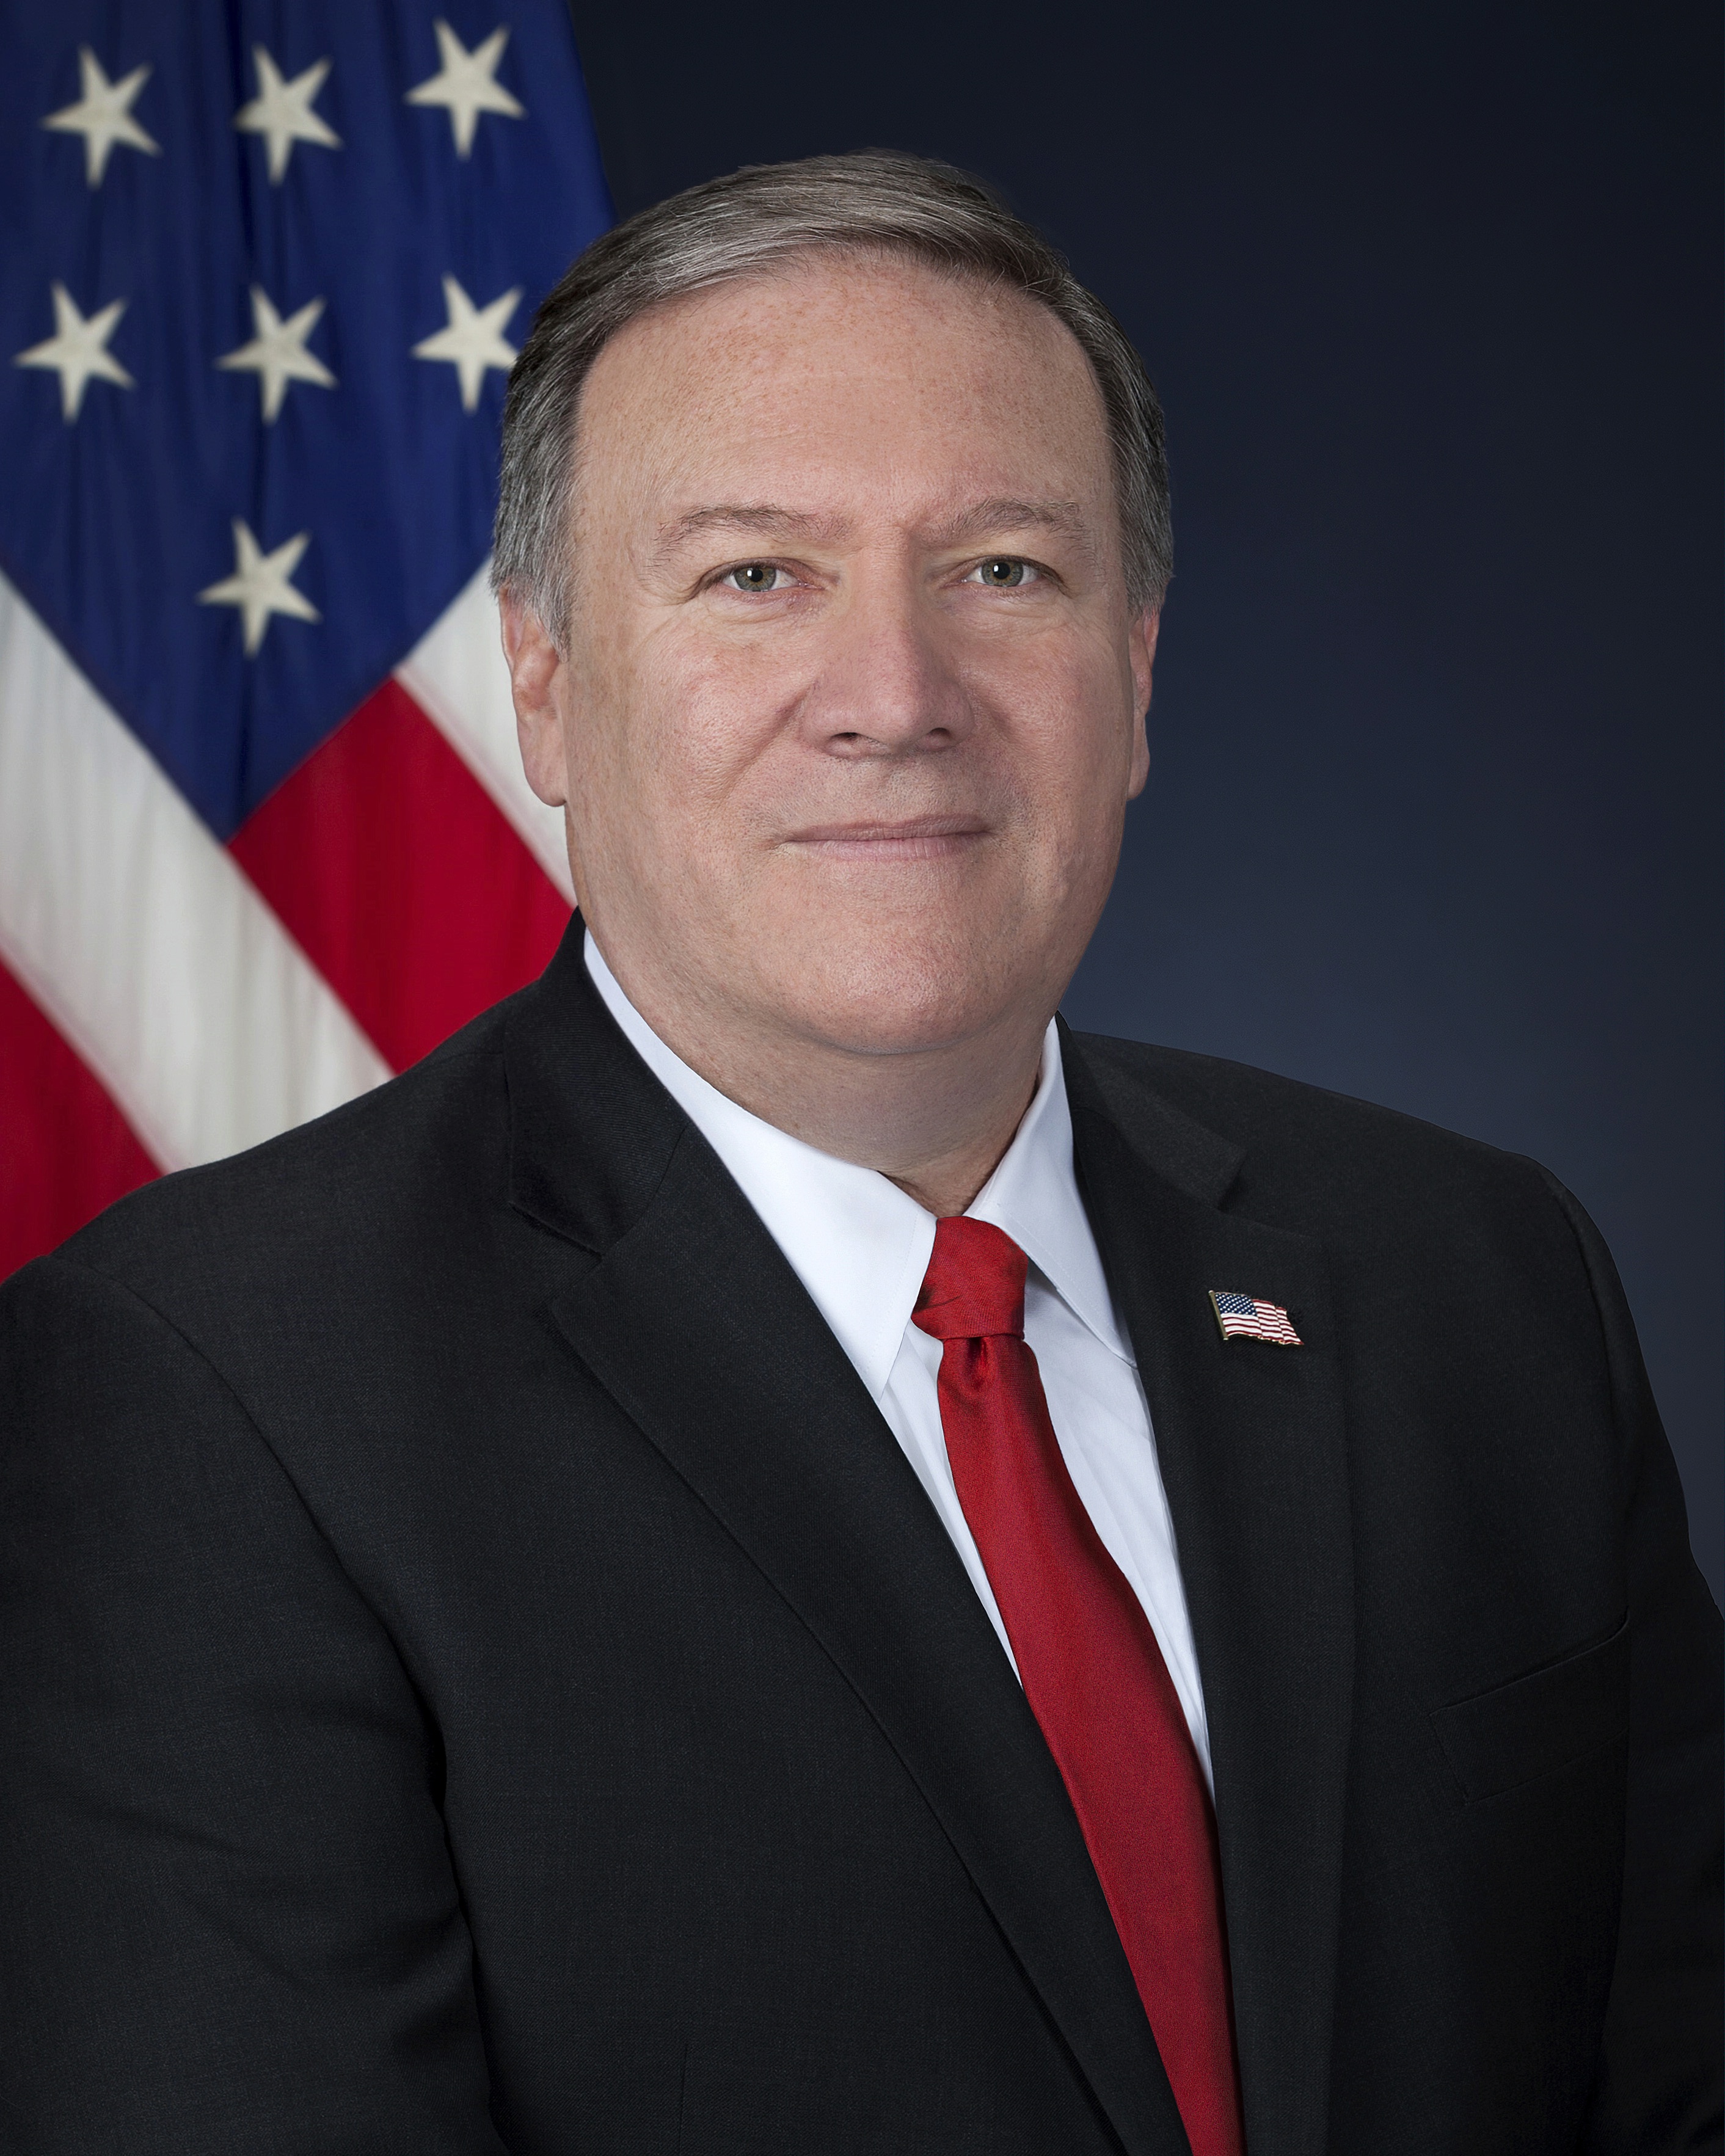 Pompeo to headline fundraiser in early-voting South Carolina